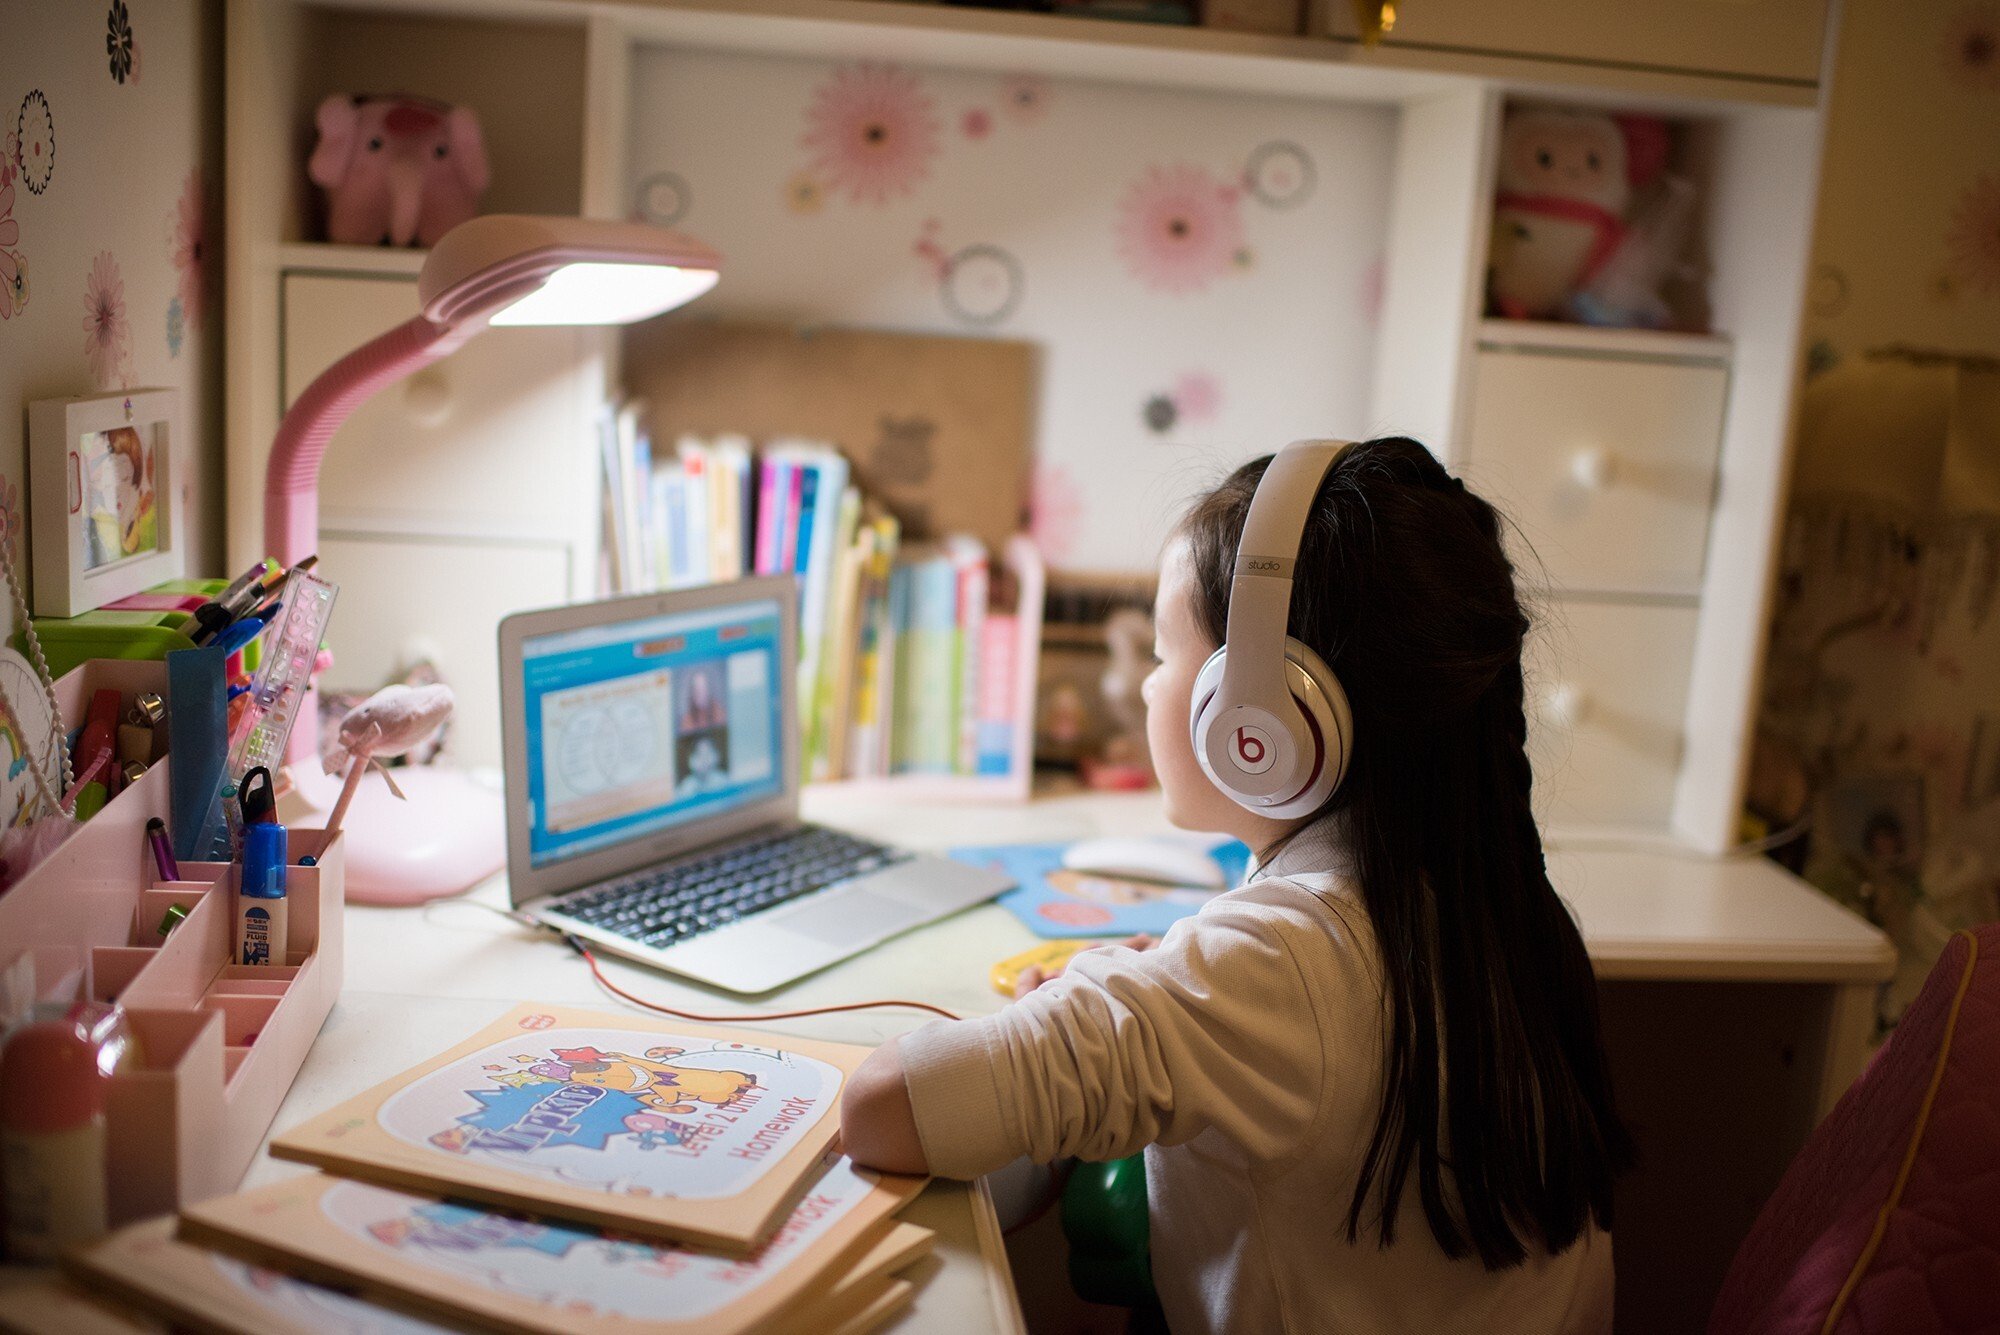 Vipkid has ended new local classes taught by foreign-based tutors to comply with regulations. Photo: Handout